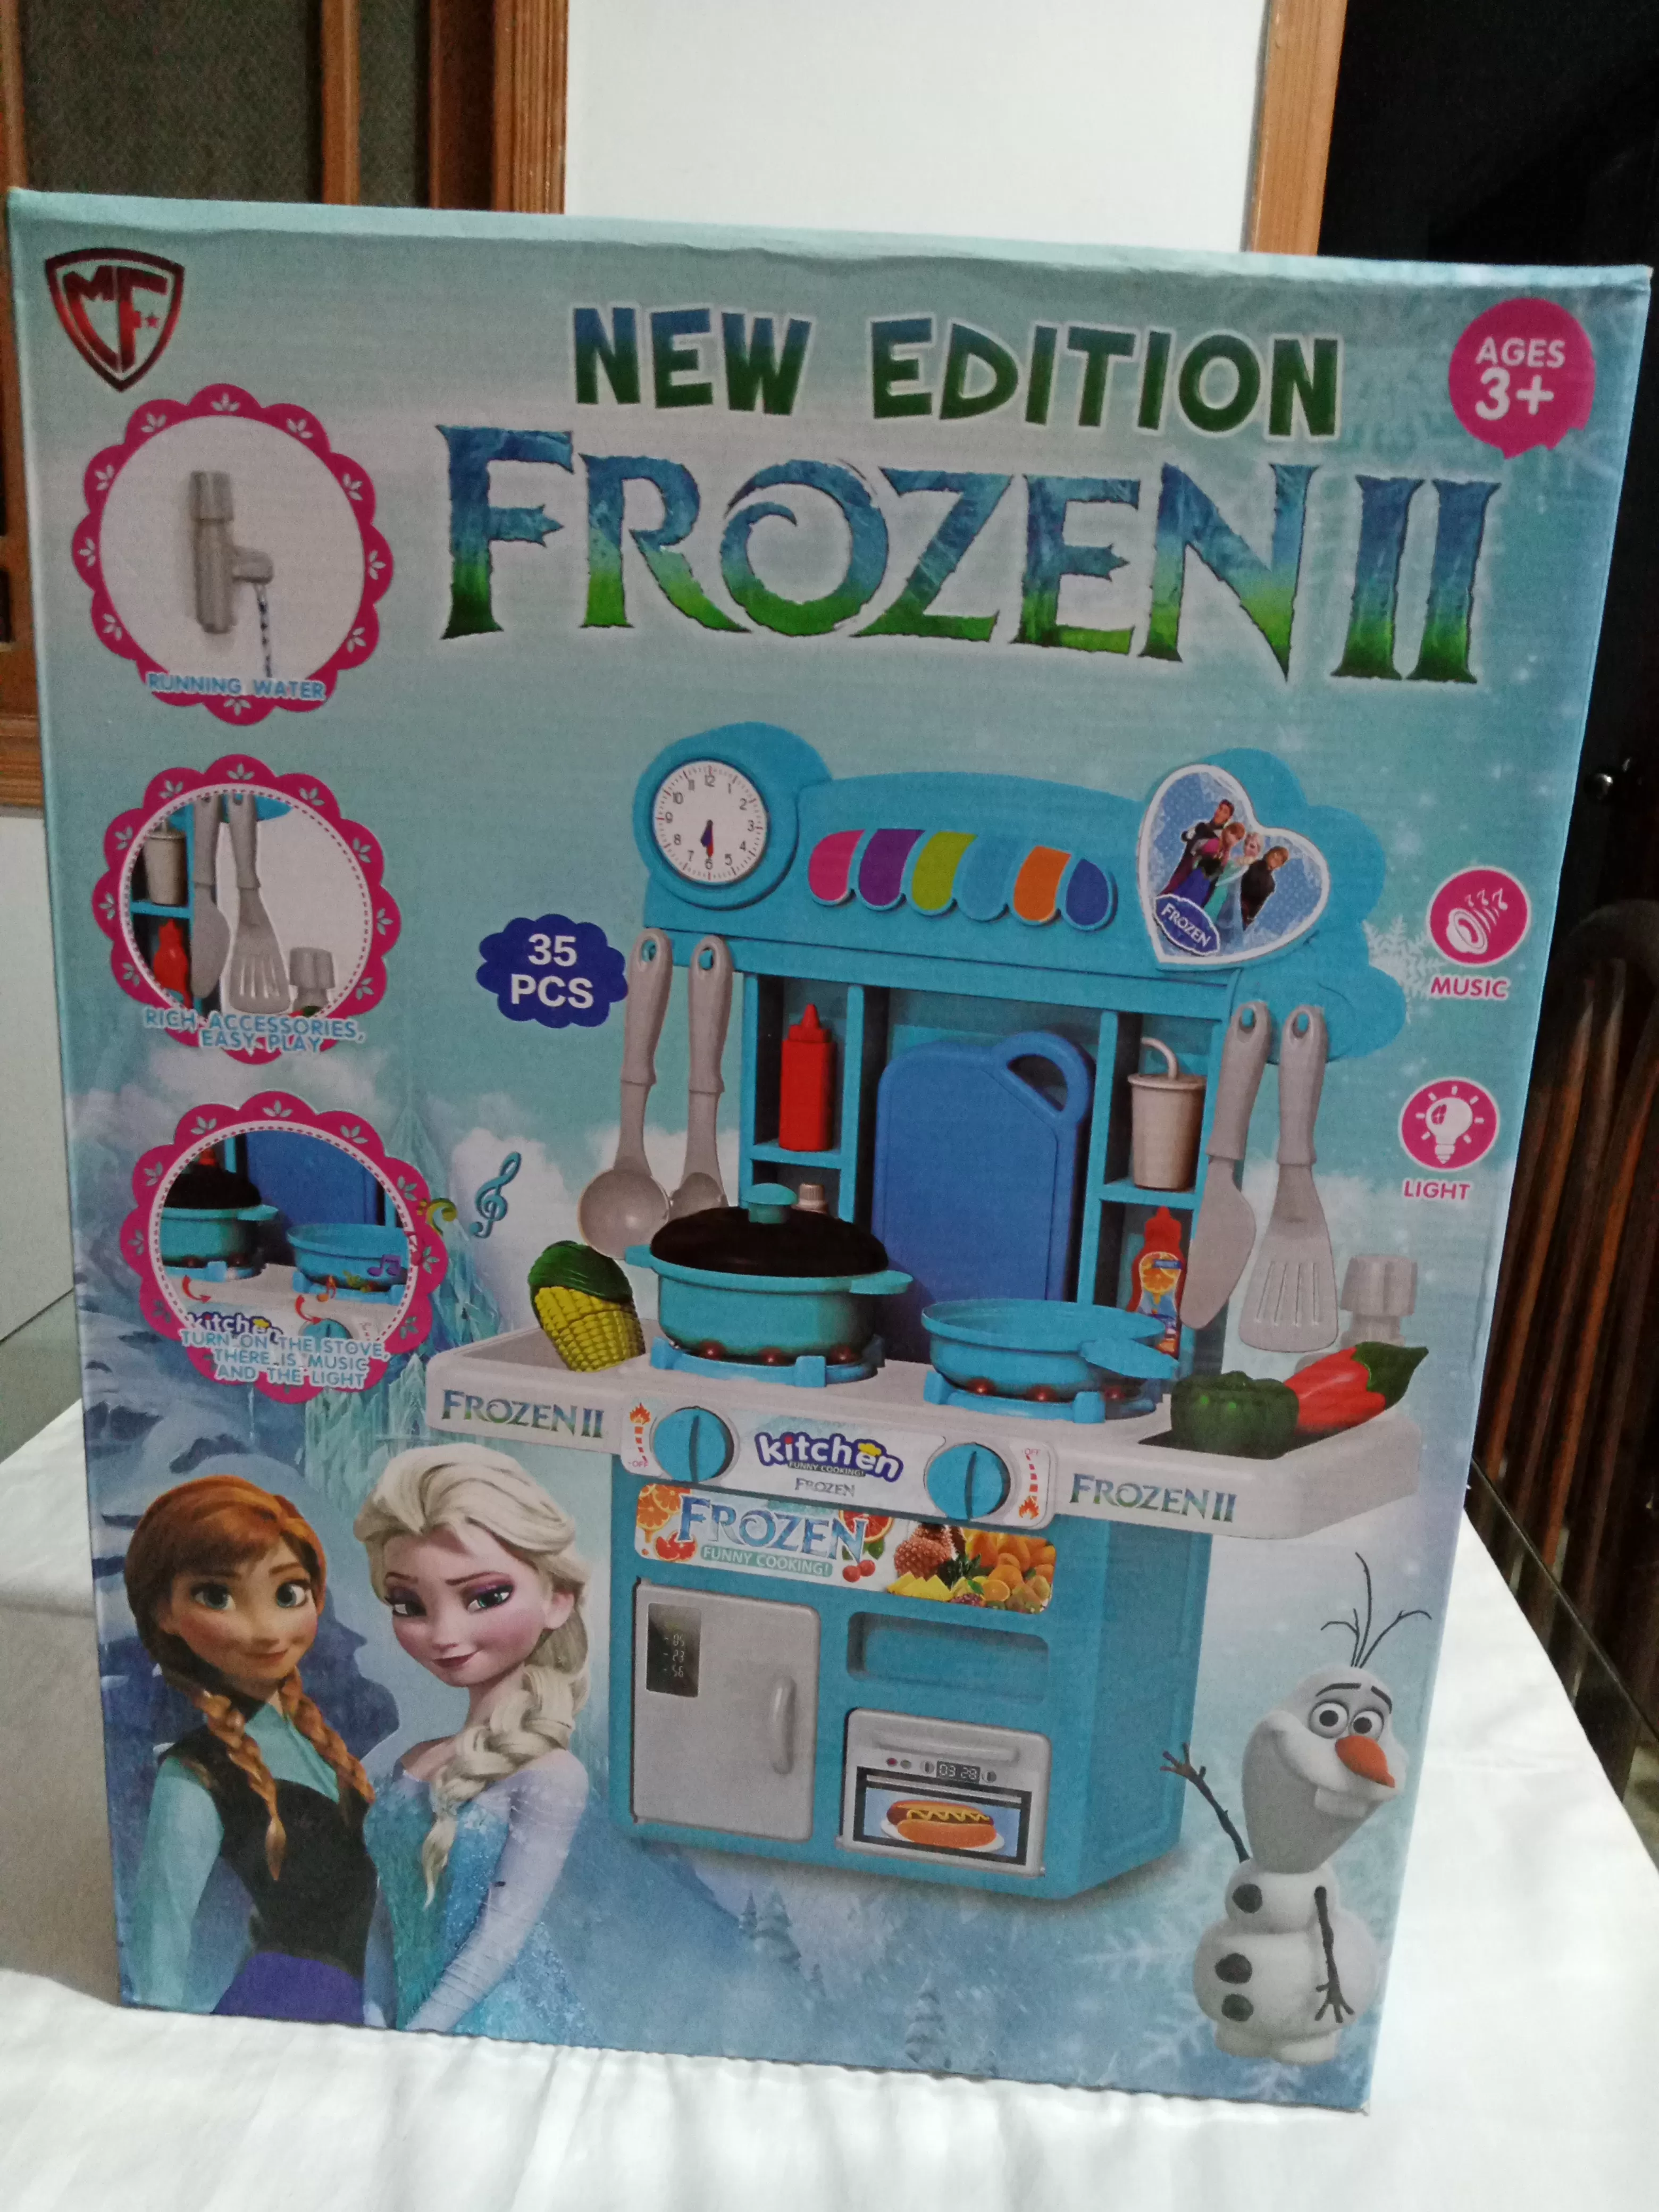 Frozen II - New Edition Kitchen Counter with accessories - 35pcs